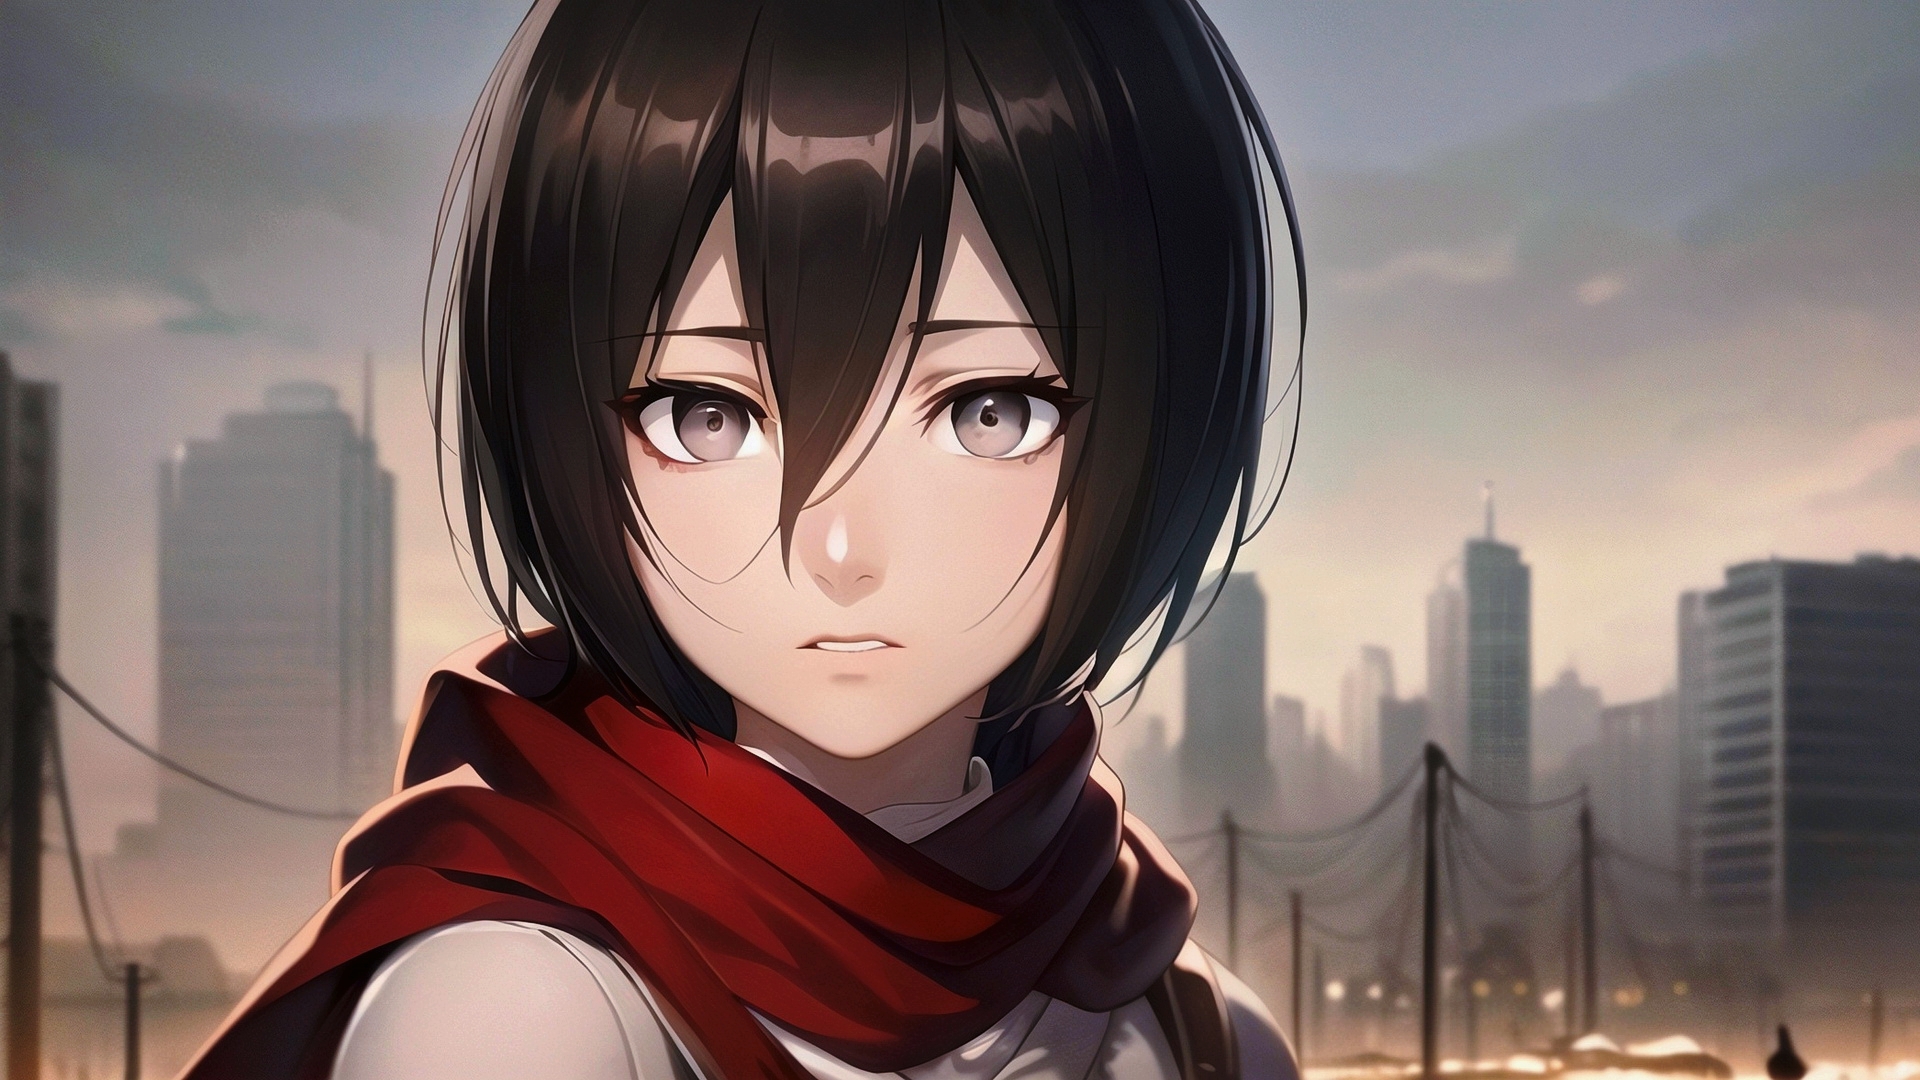 Anime hero Mikasa in front of the city and the sky